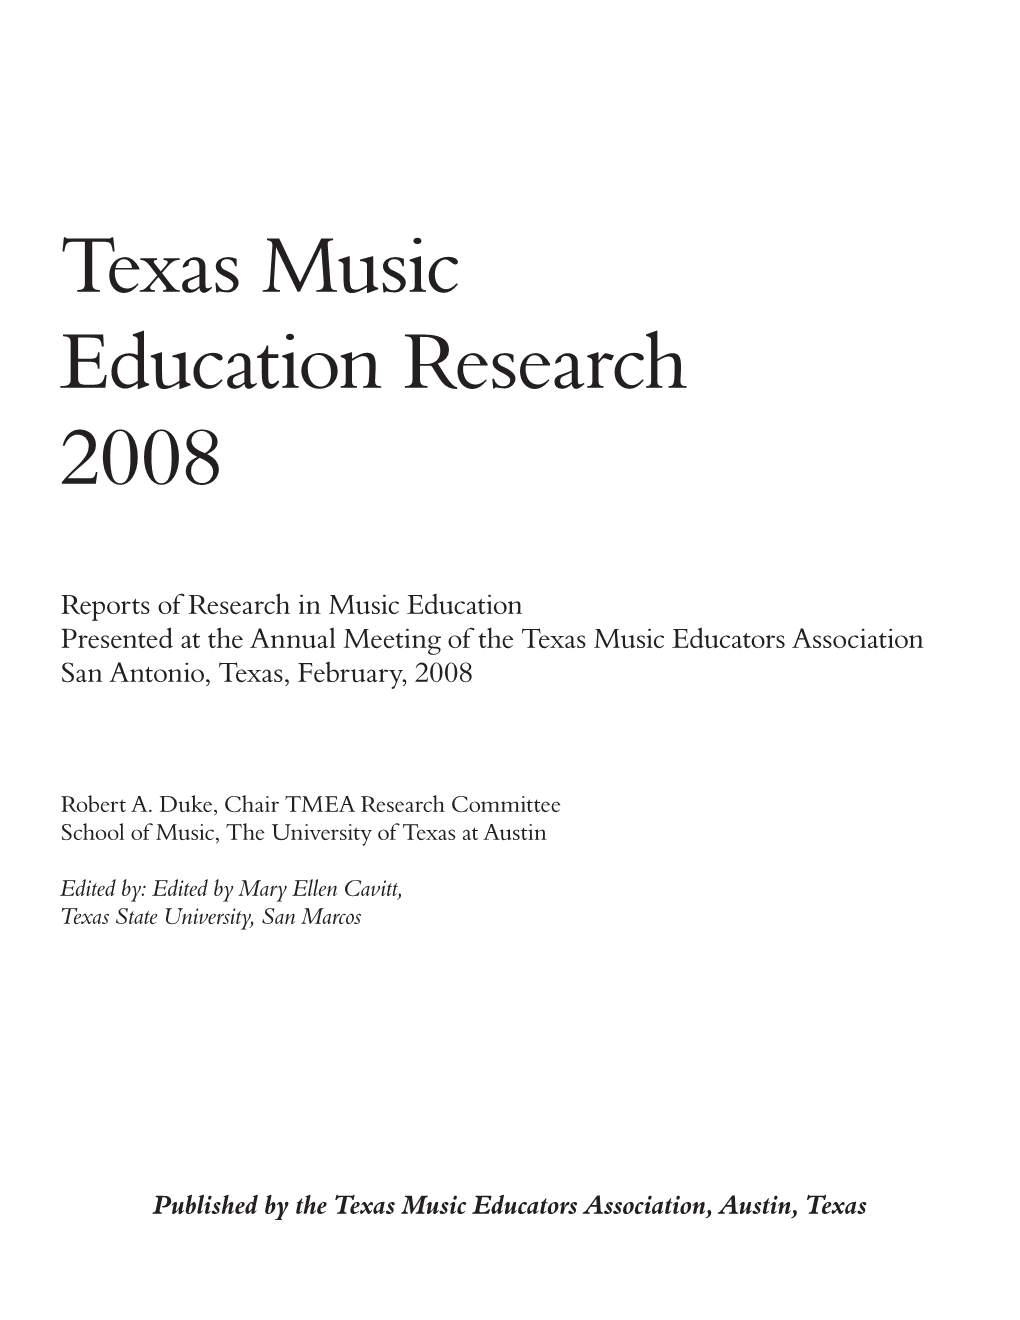 Texas Music Education Research 2008